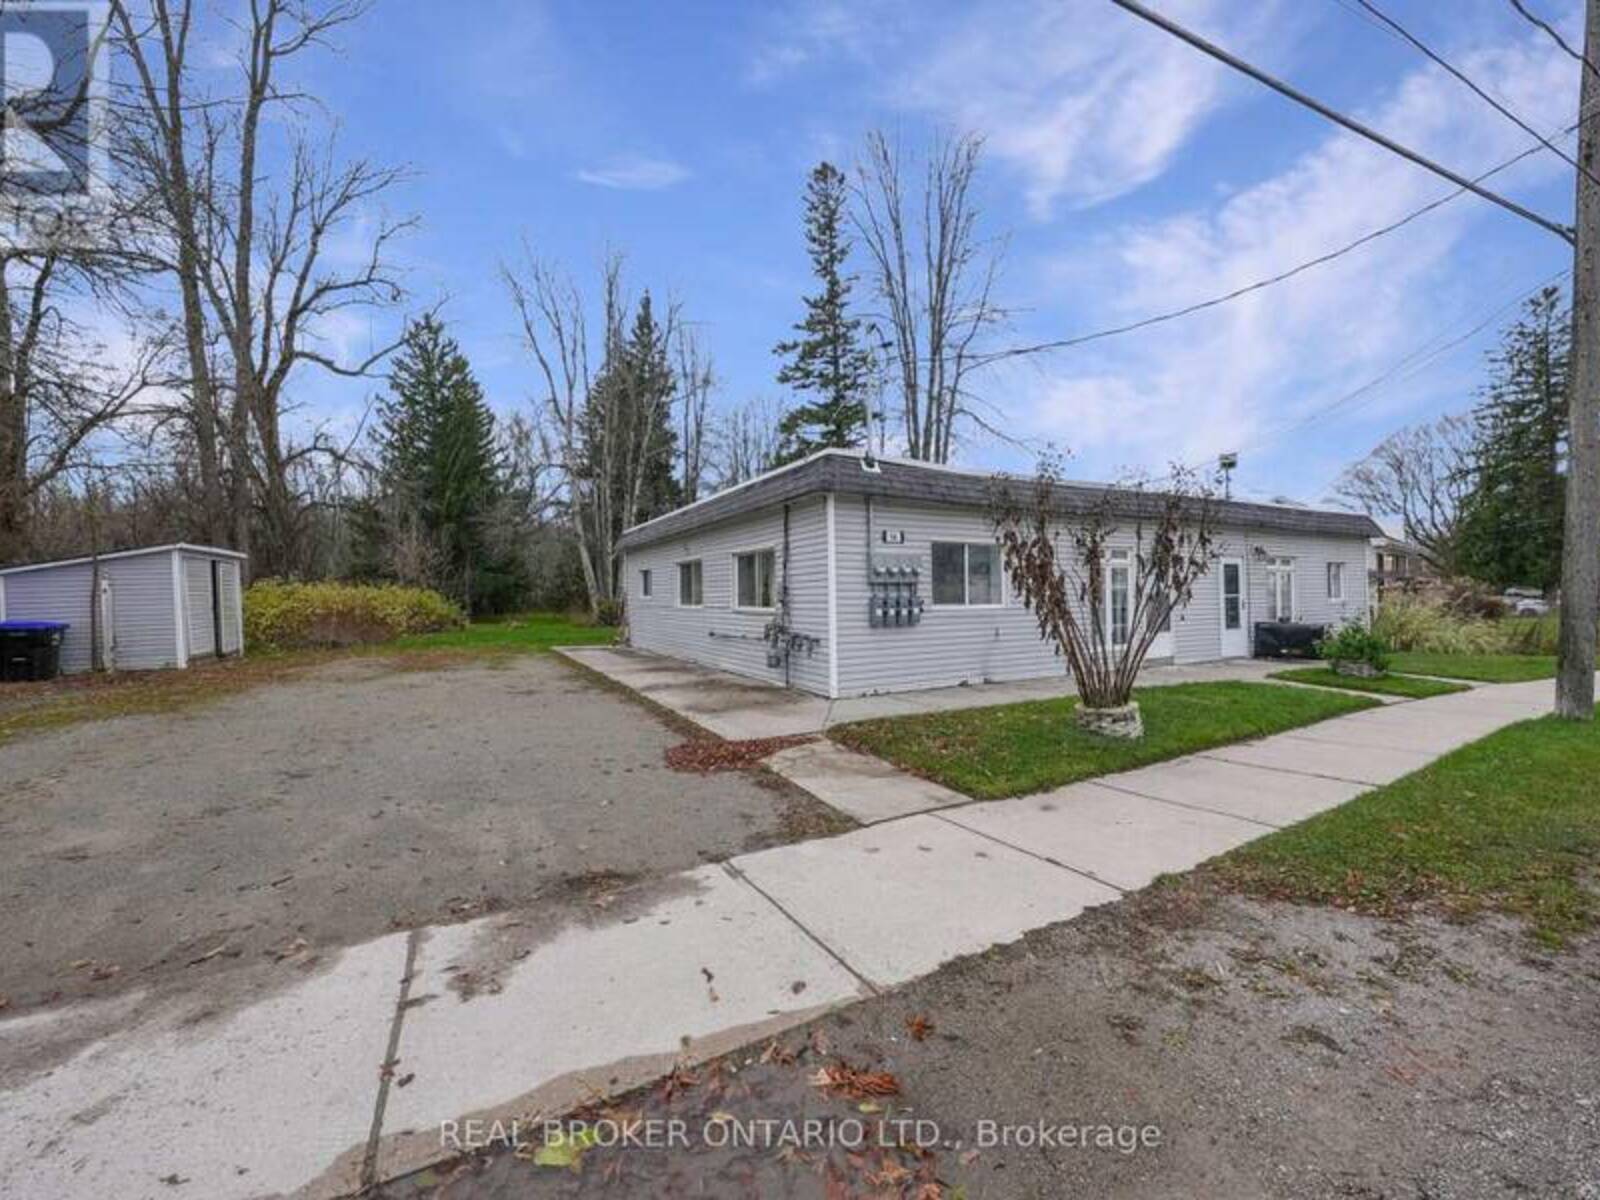 54 COLDWATER RD, Tay, Ontario L0K 2C0